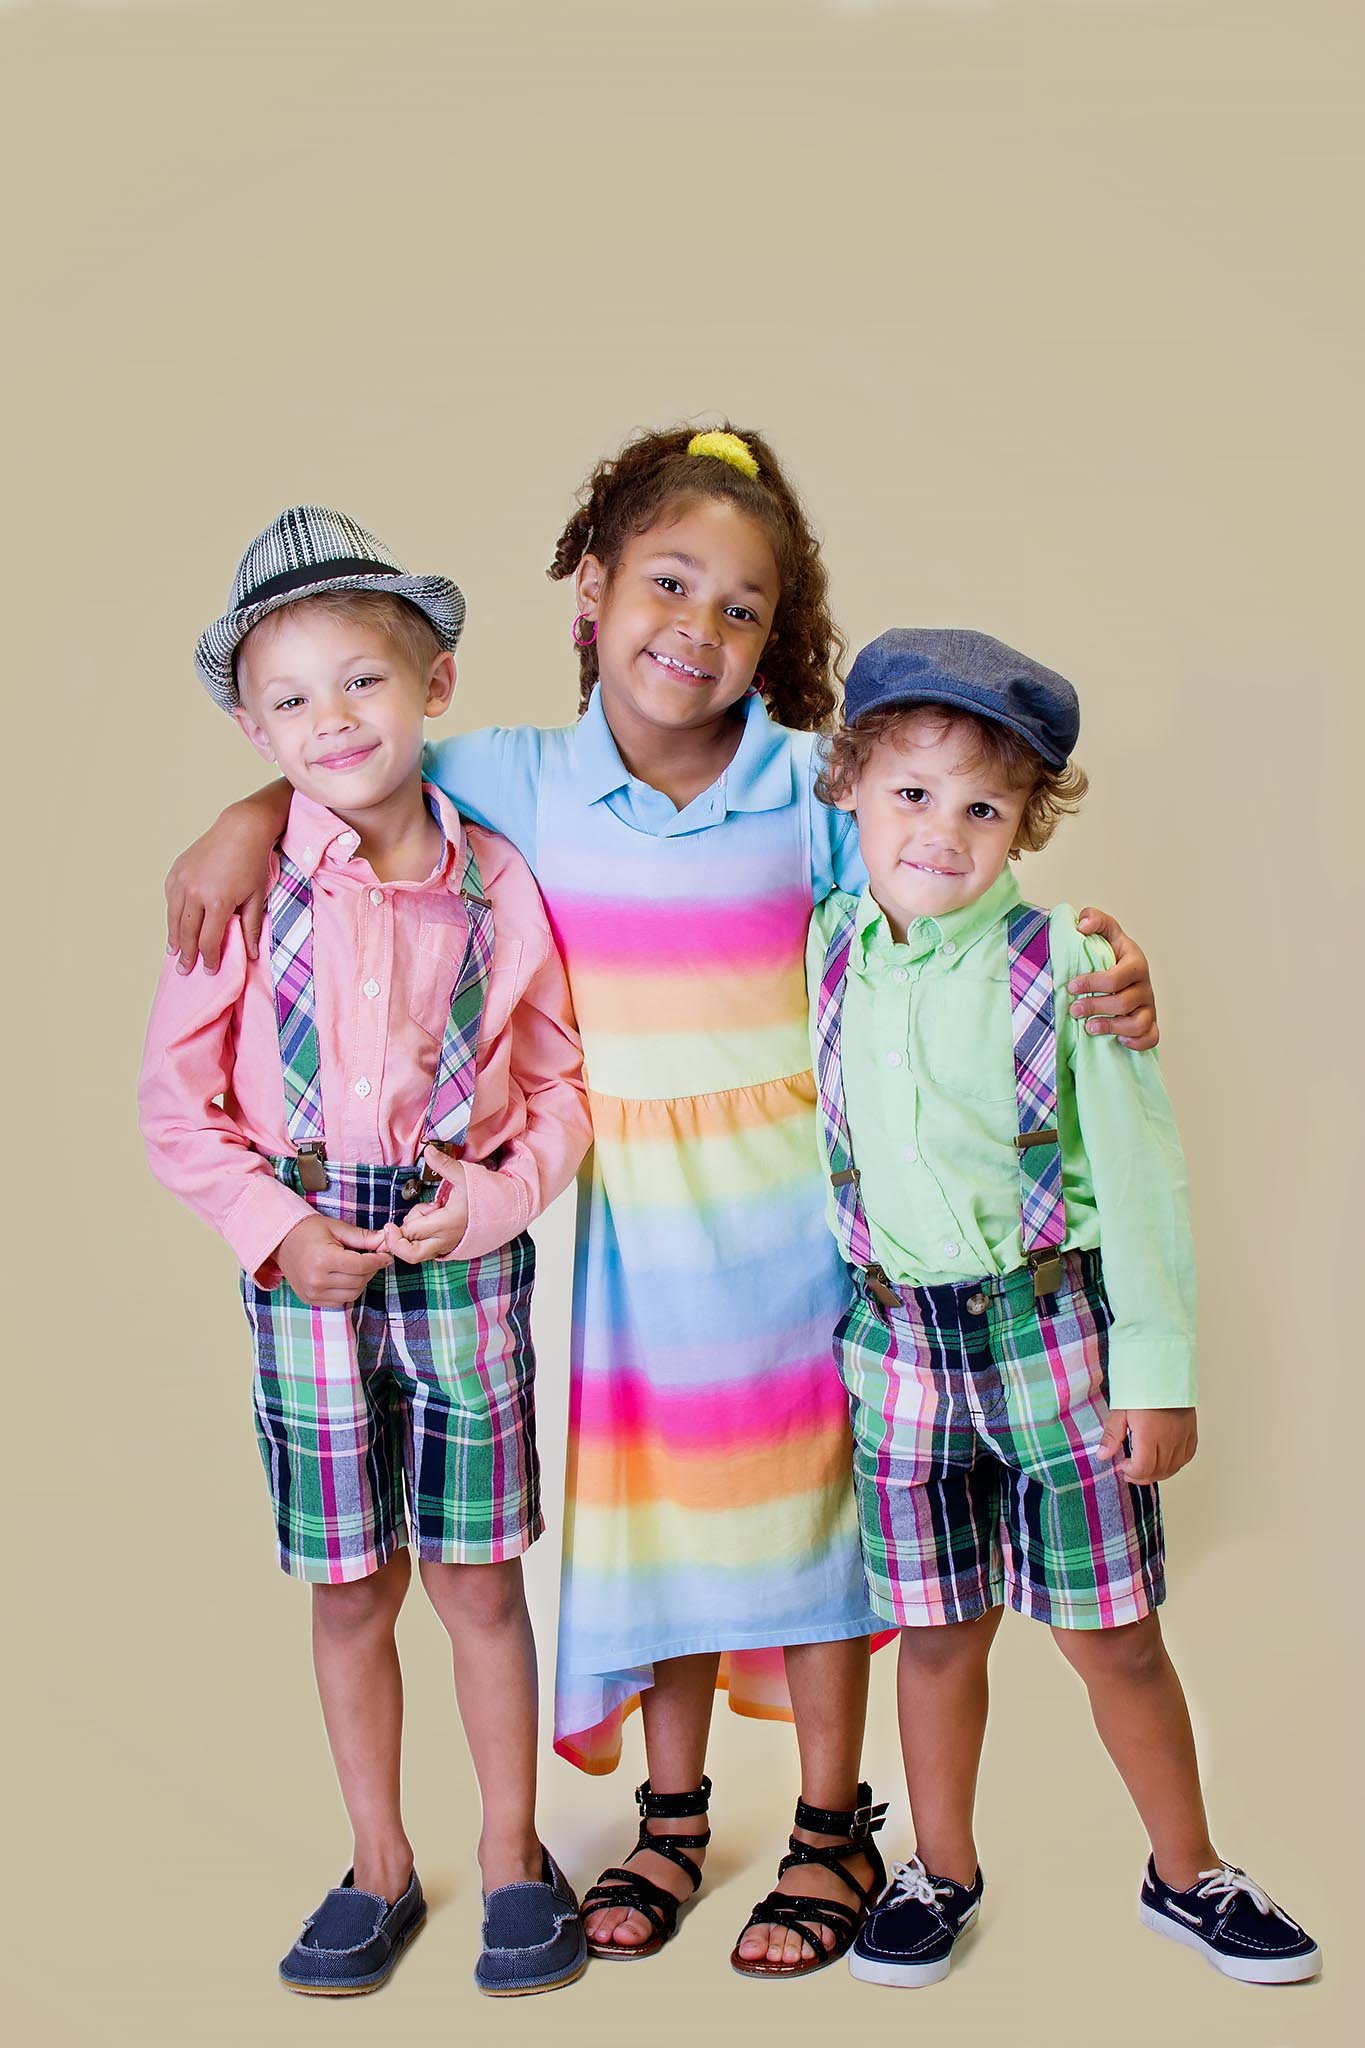 brothers-with-sister-in-rainbow-outfits.jpg